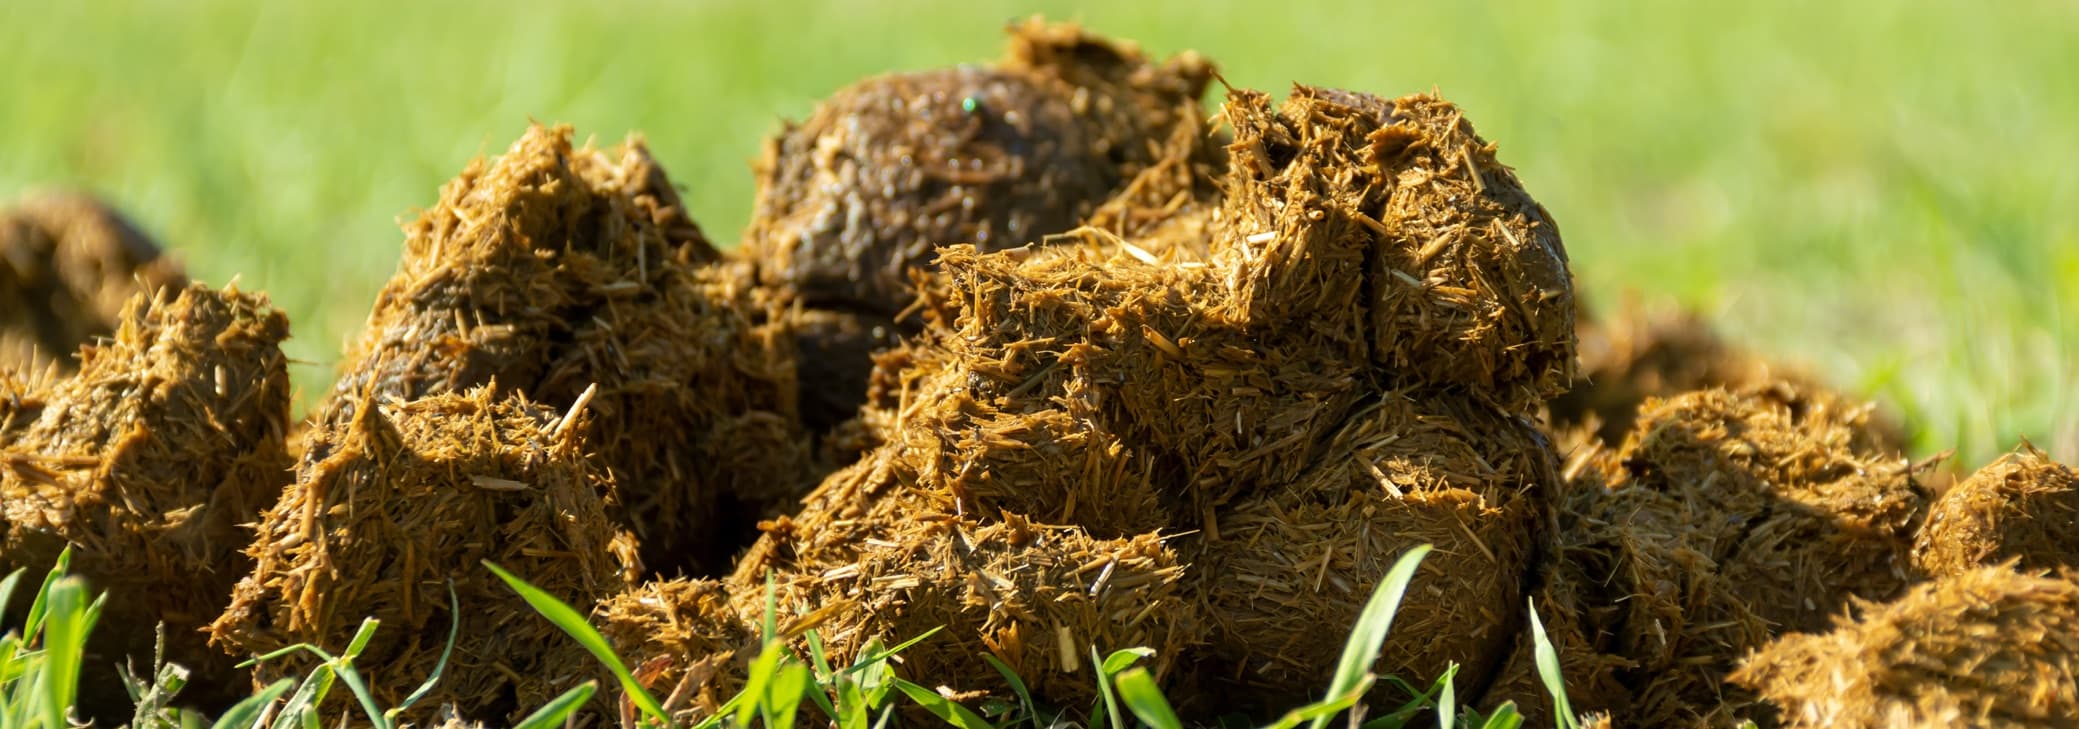 How Long Does It Take To Compost Horse Manure